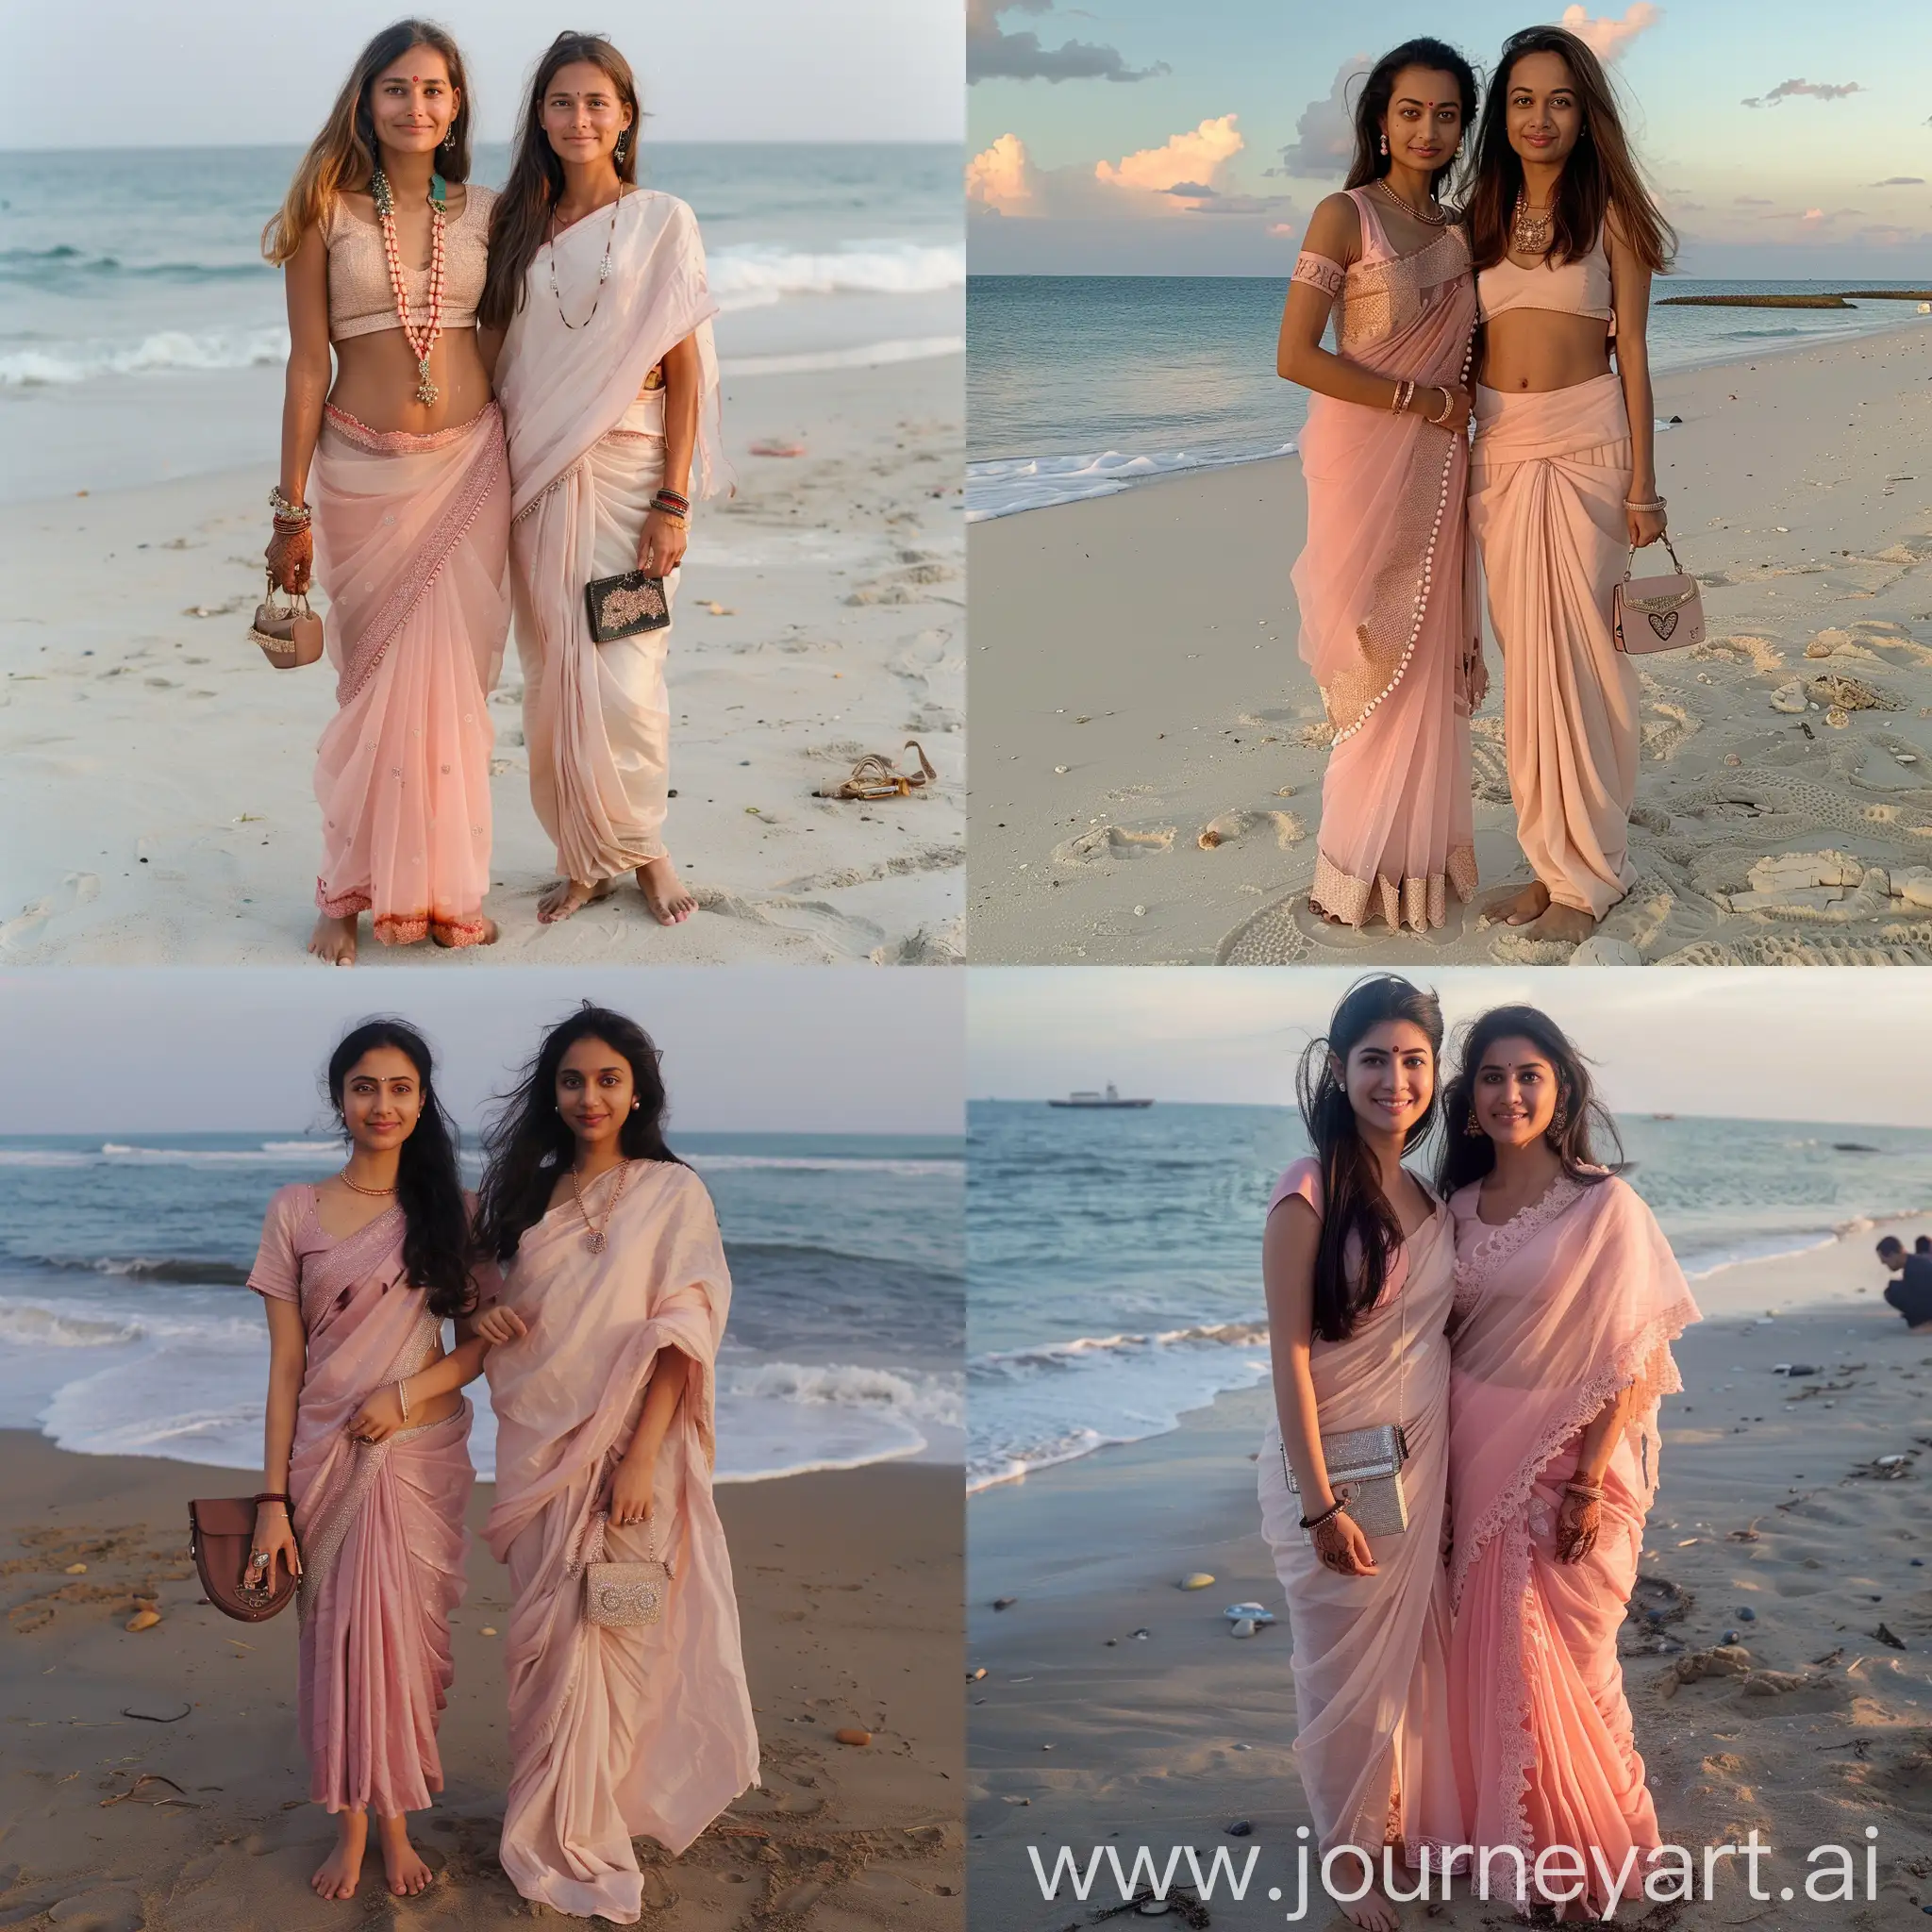 a beautiful girl stand on the beach with a girl is indian wear a pink light sari and a small purse